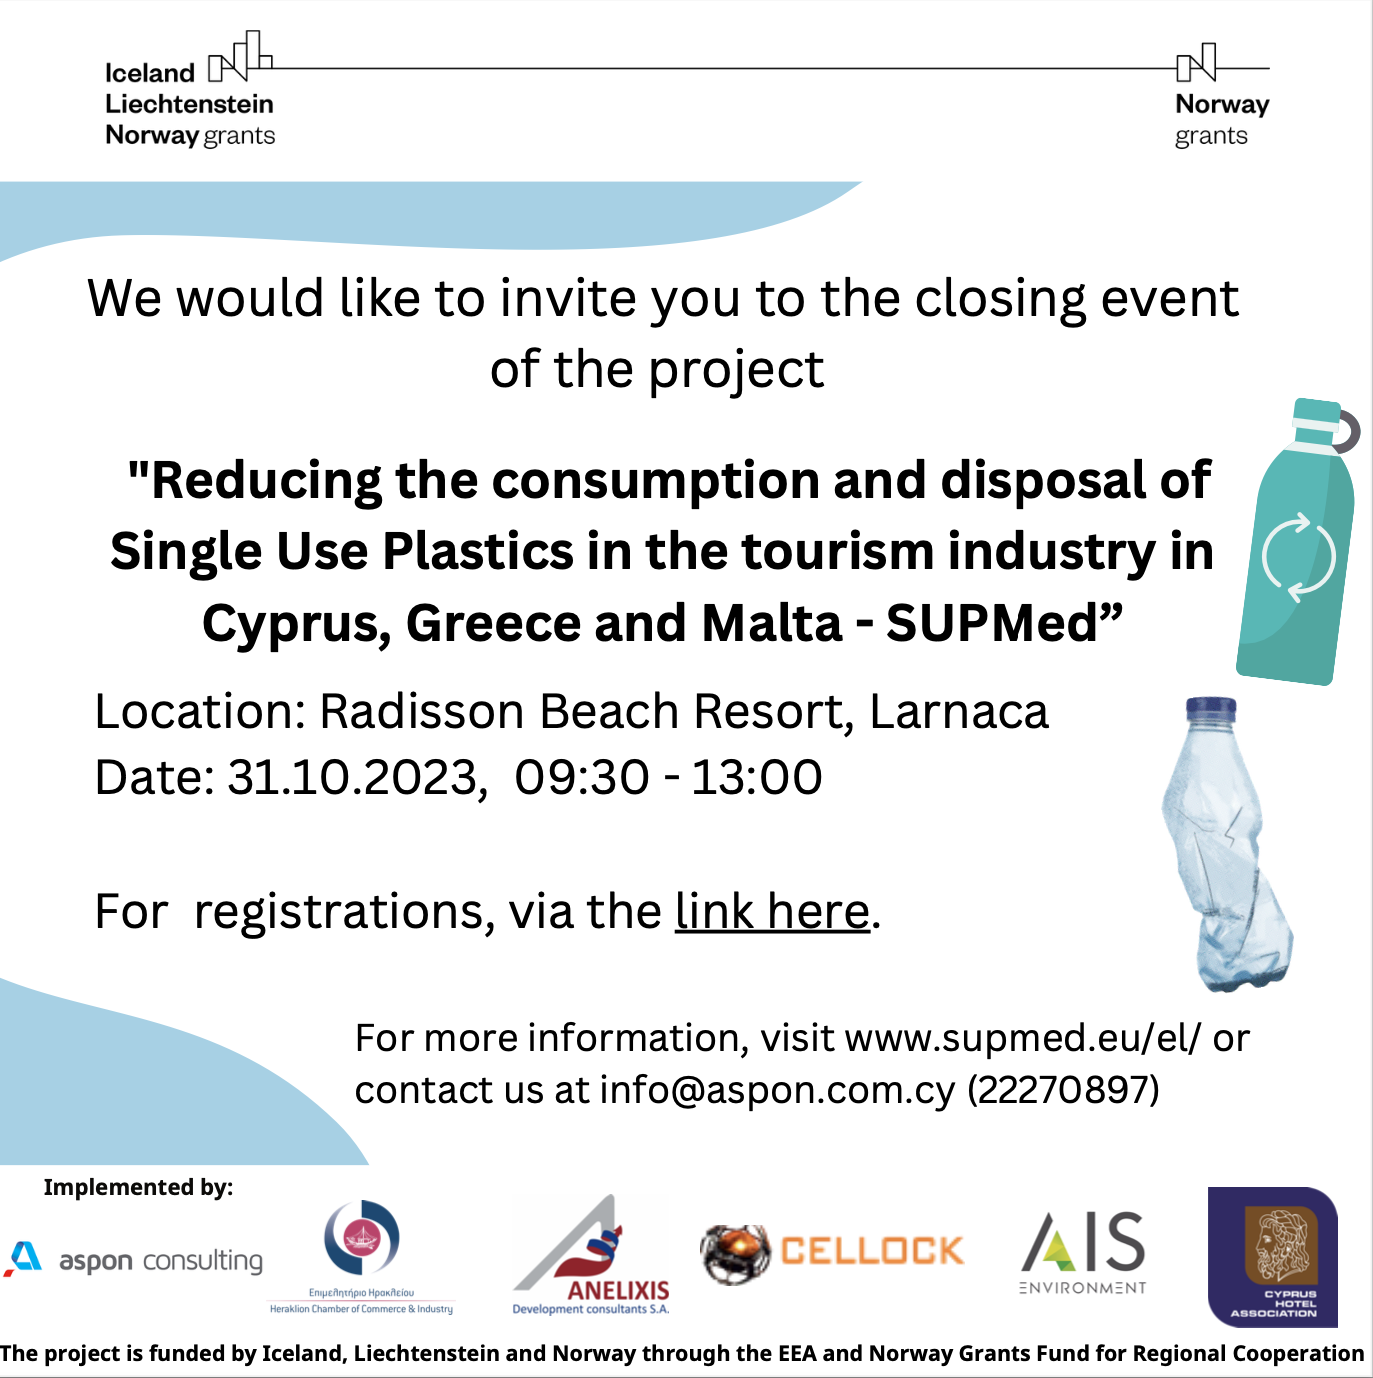 The closing event of the project is happening! 31st of October 2023 in Cyprus